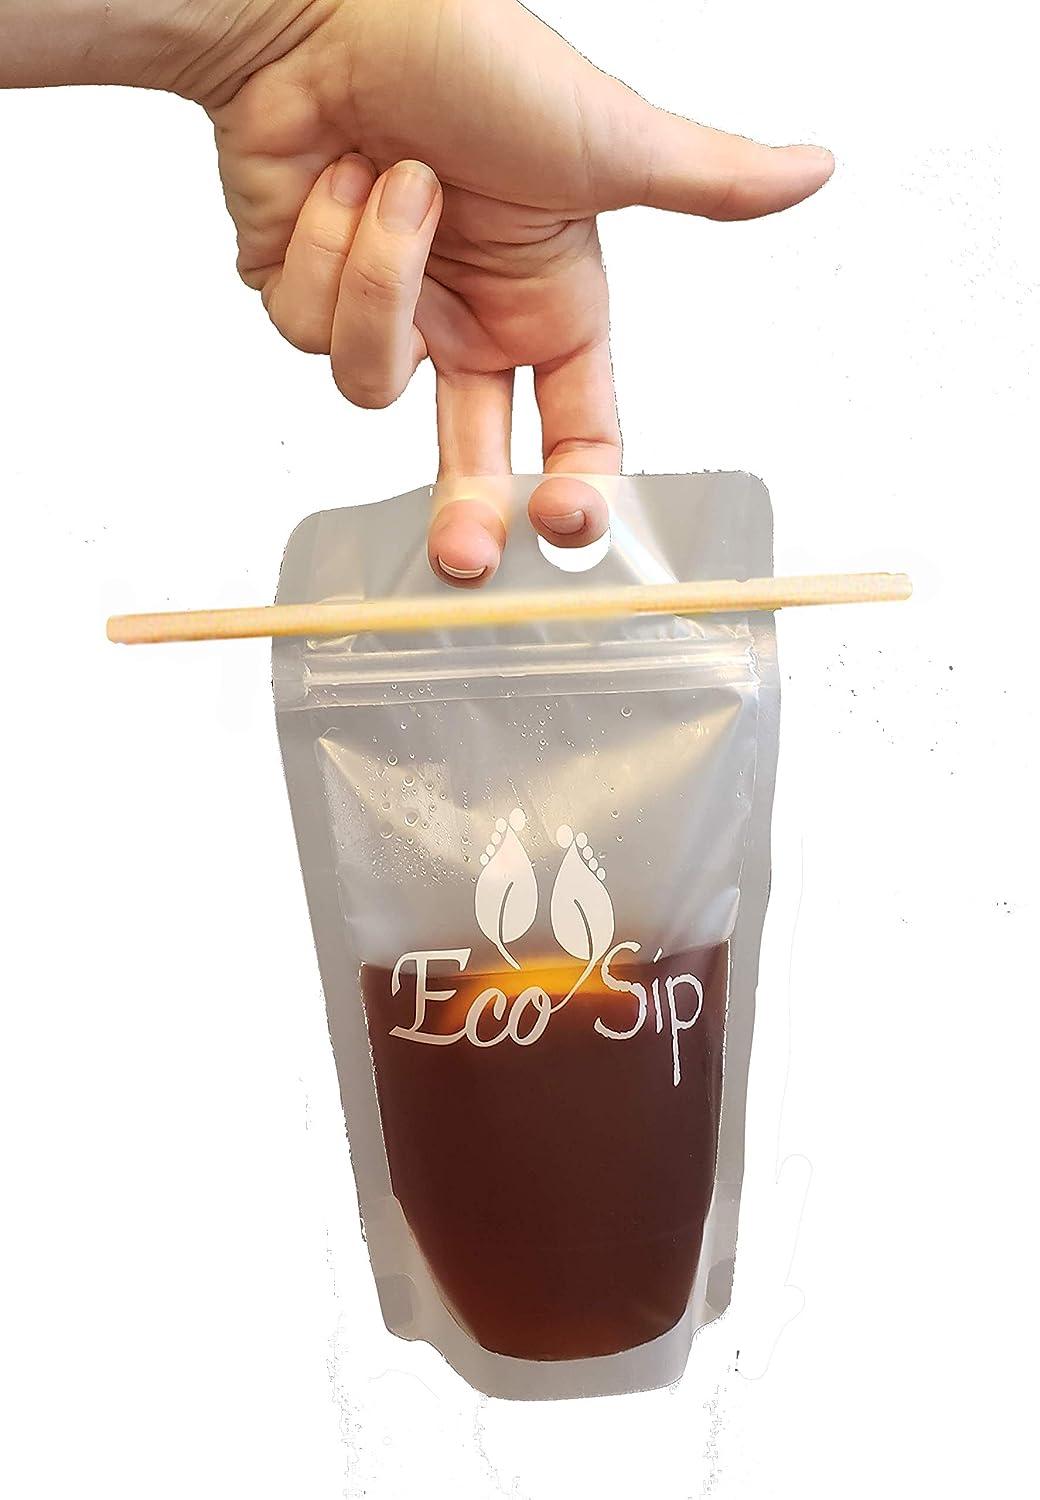 25 PC 5x9 Let's Party Collapsible Plastic Drink Pouches with Straws